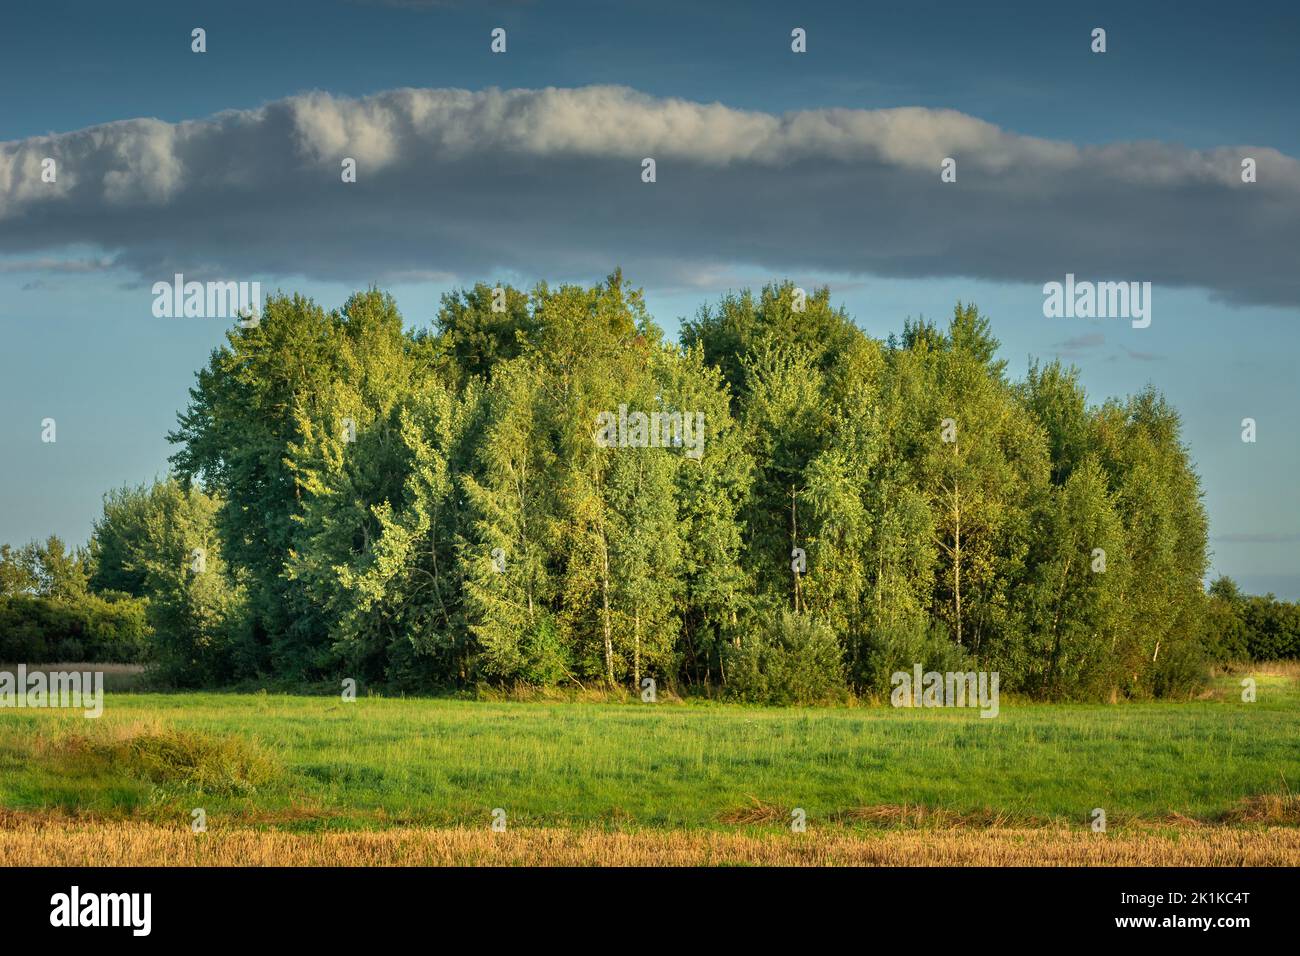 Cloud over a group of trees on the green meadow, September view in eastern Poland Stock Photo